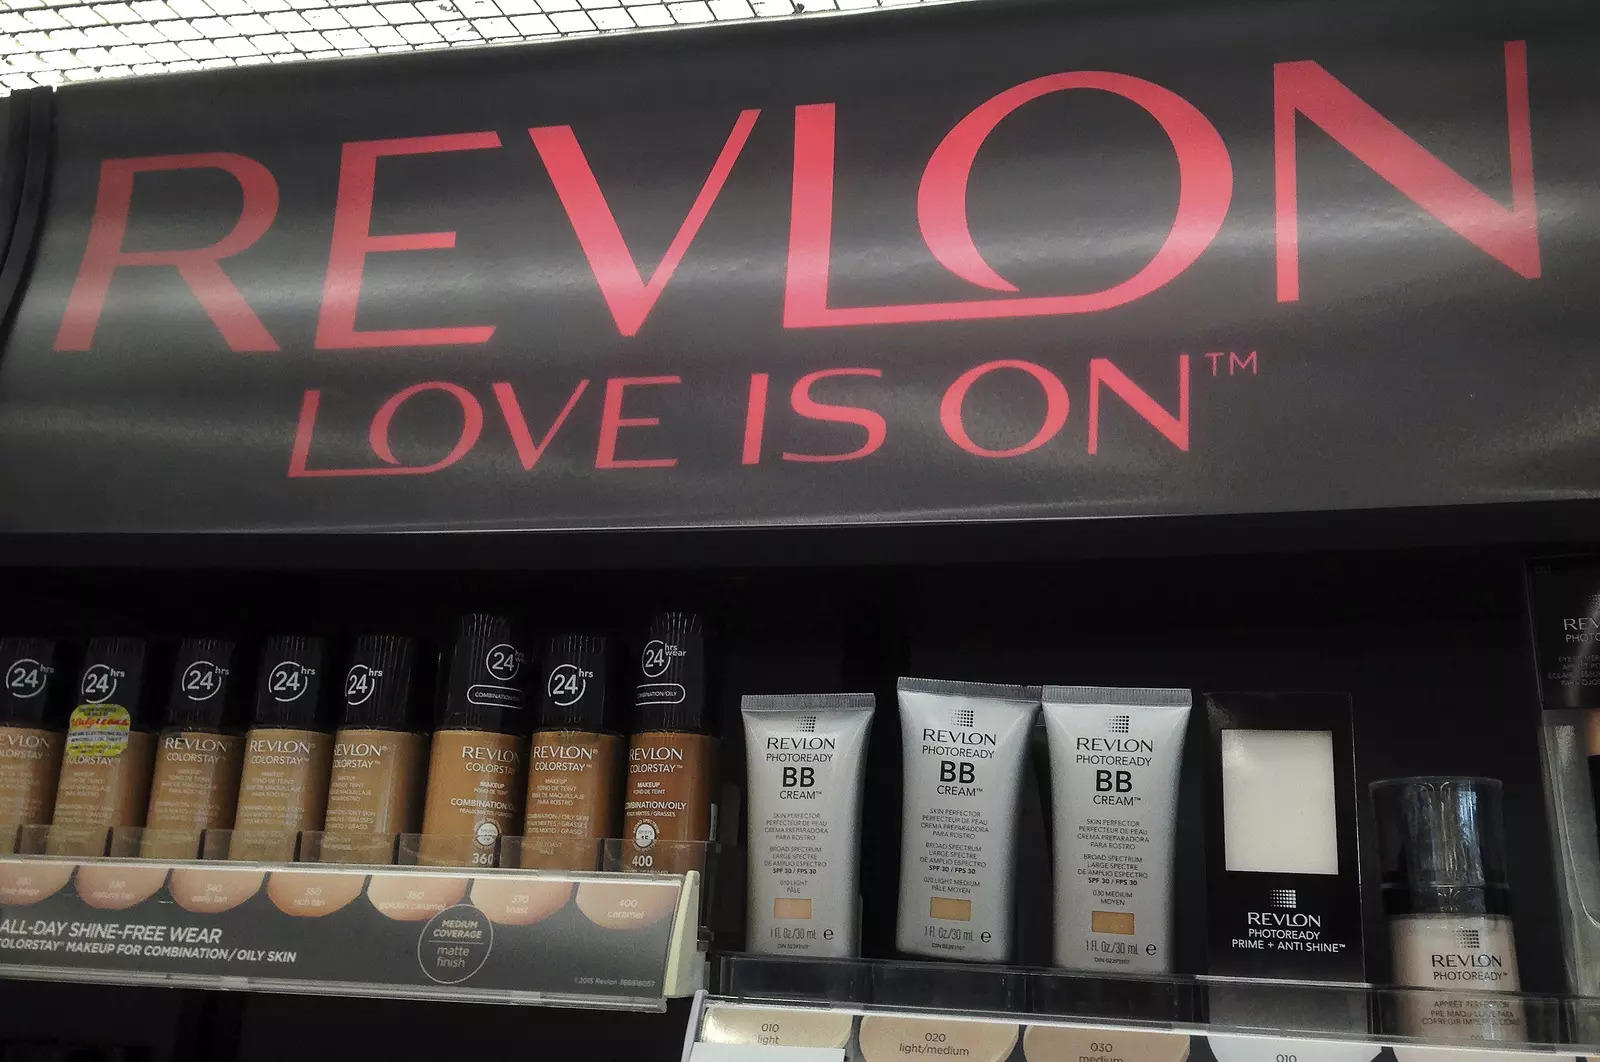 Revlon files for bankruptcy protection amid heavy debt load